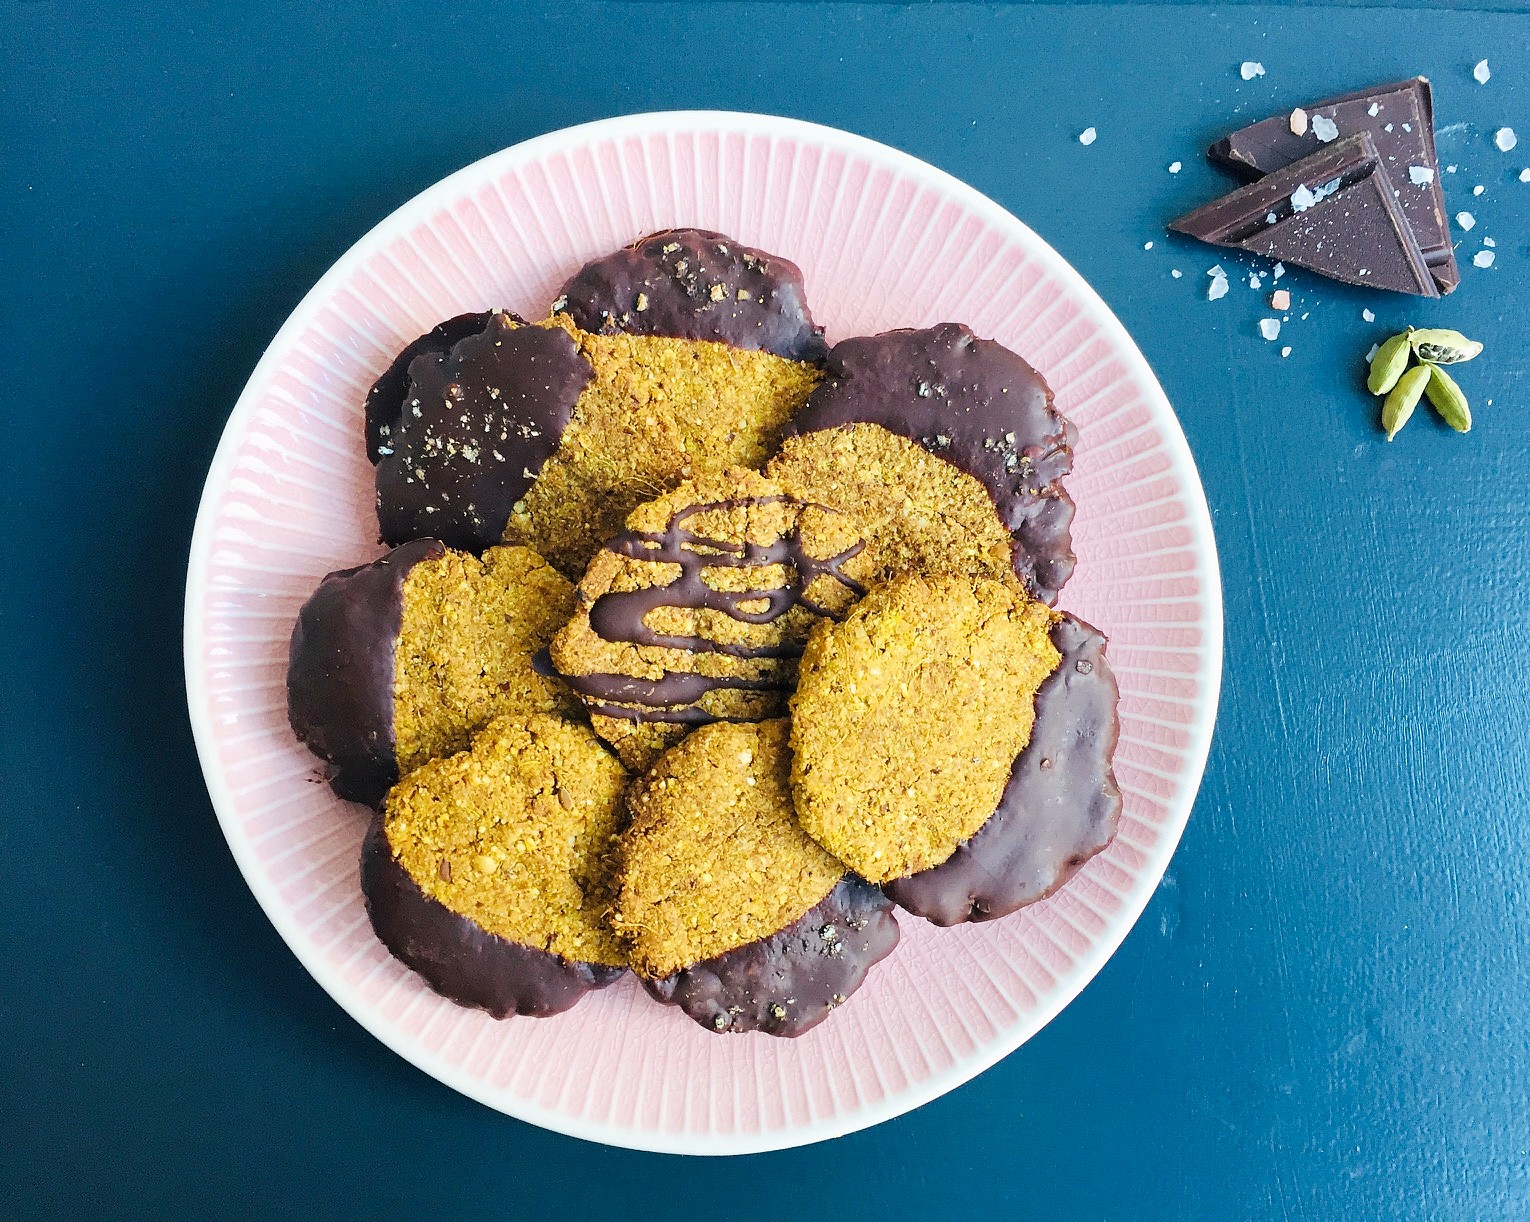 Oat and ginger biscuits with dark chocolate and sea salt